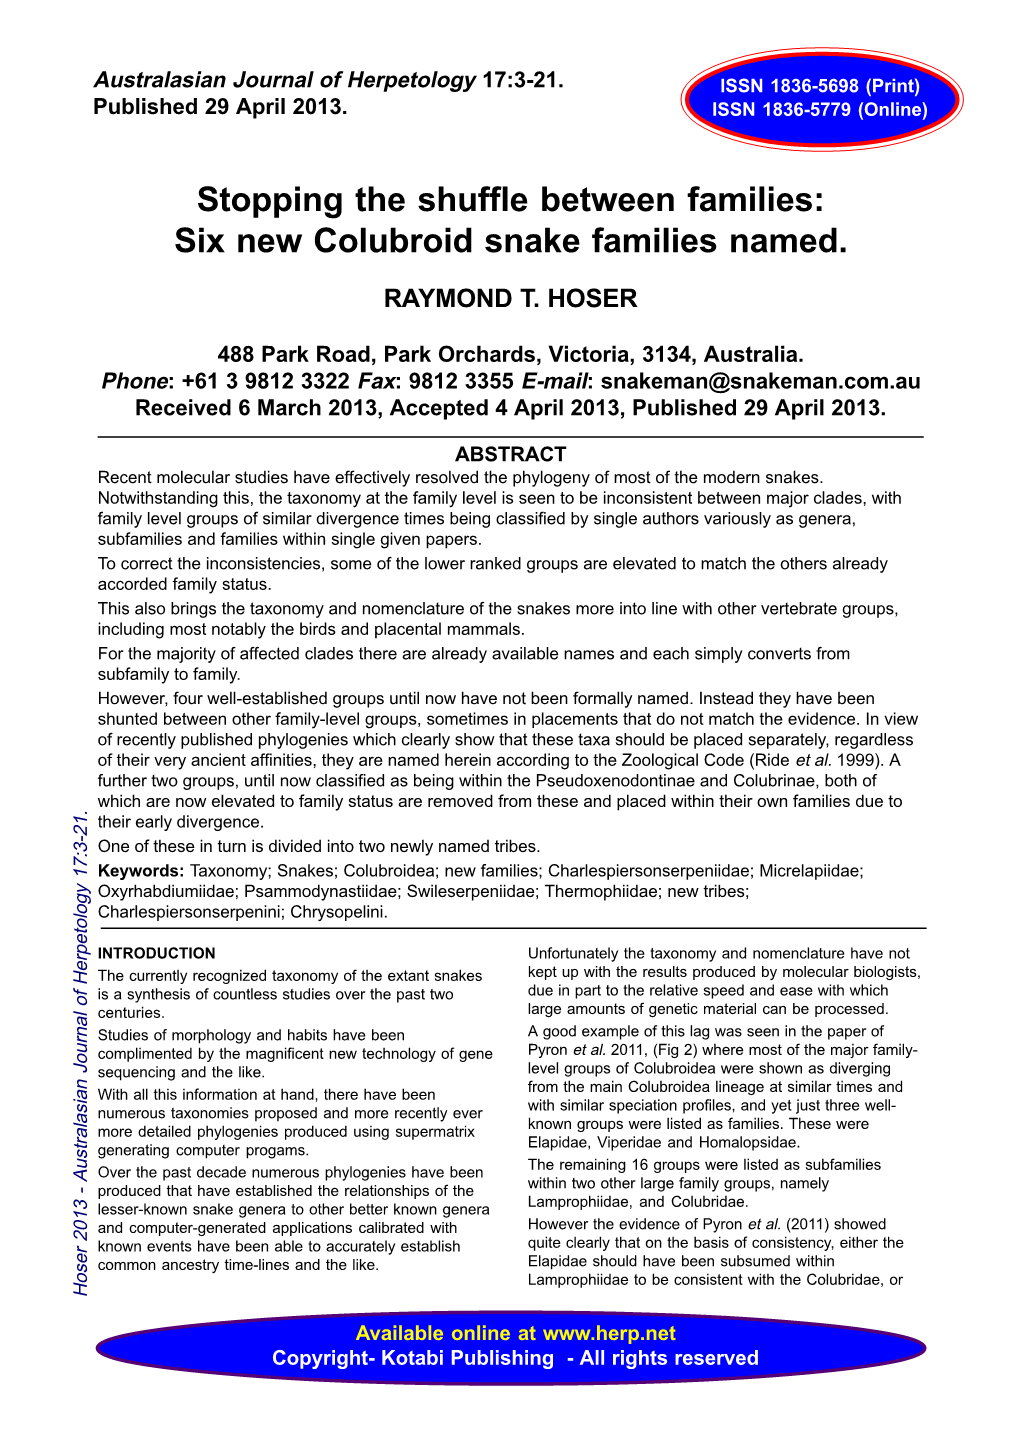 Stopping the Shuffle Between Families: Six New Colubroid Snake Families Named